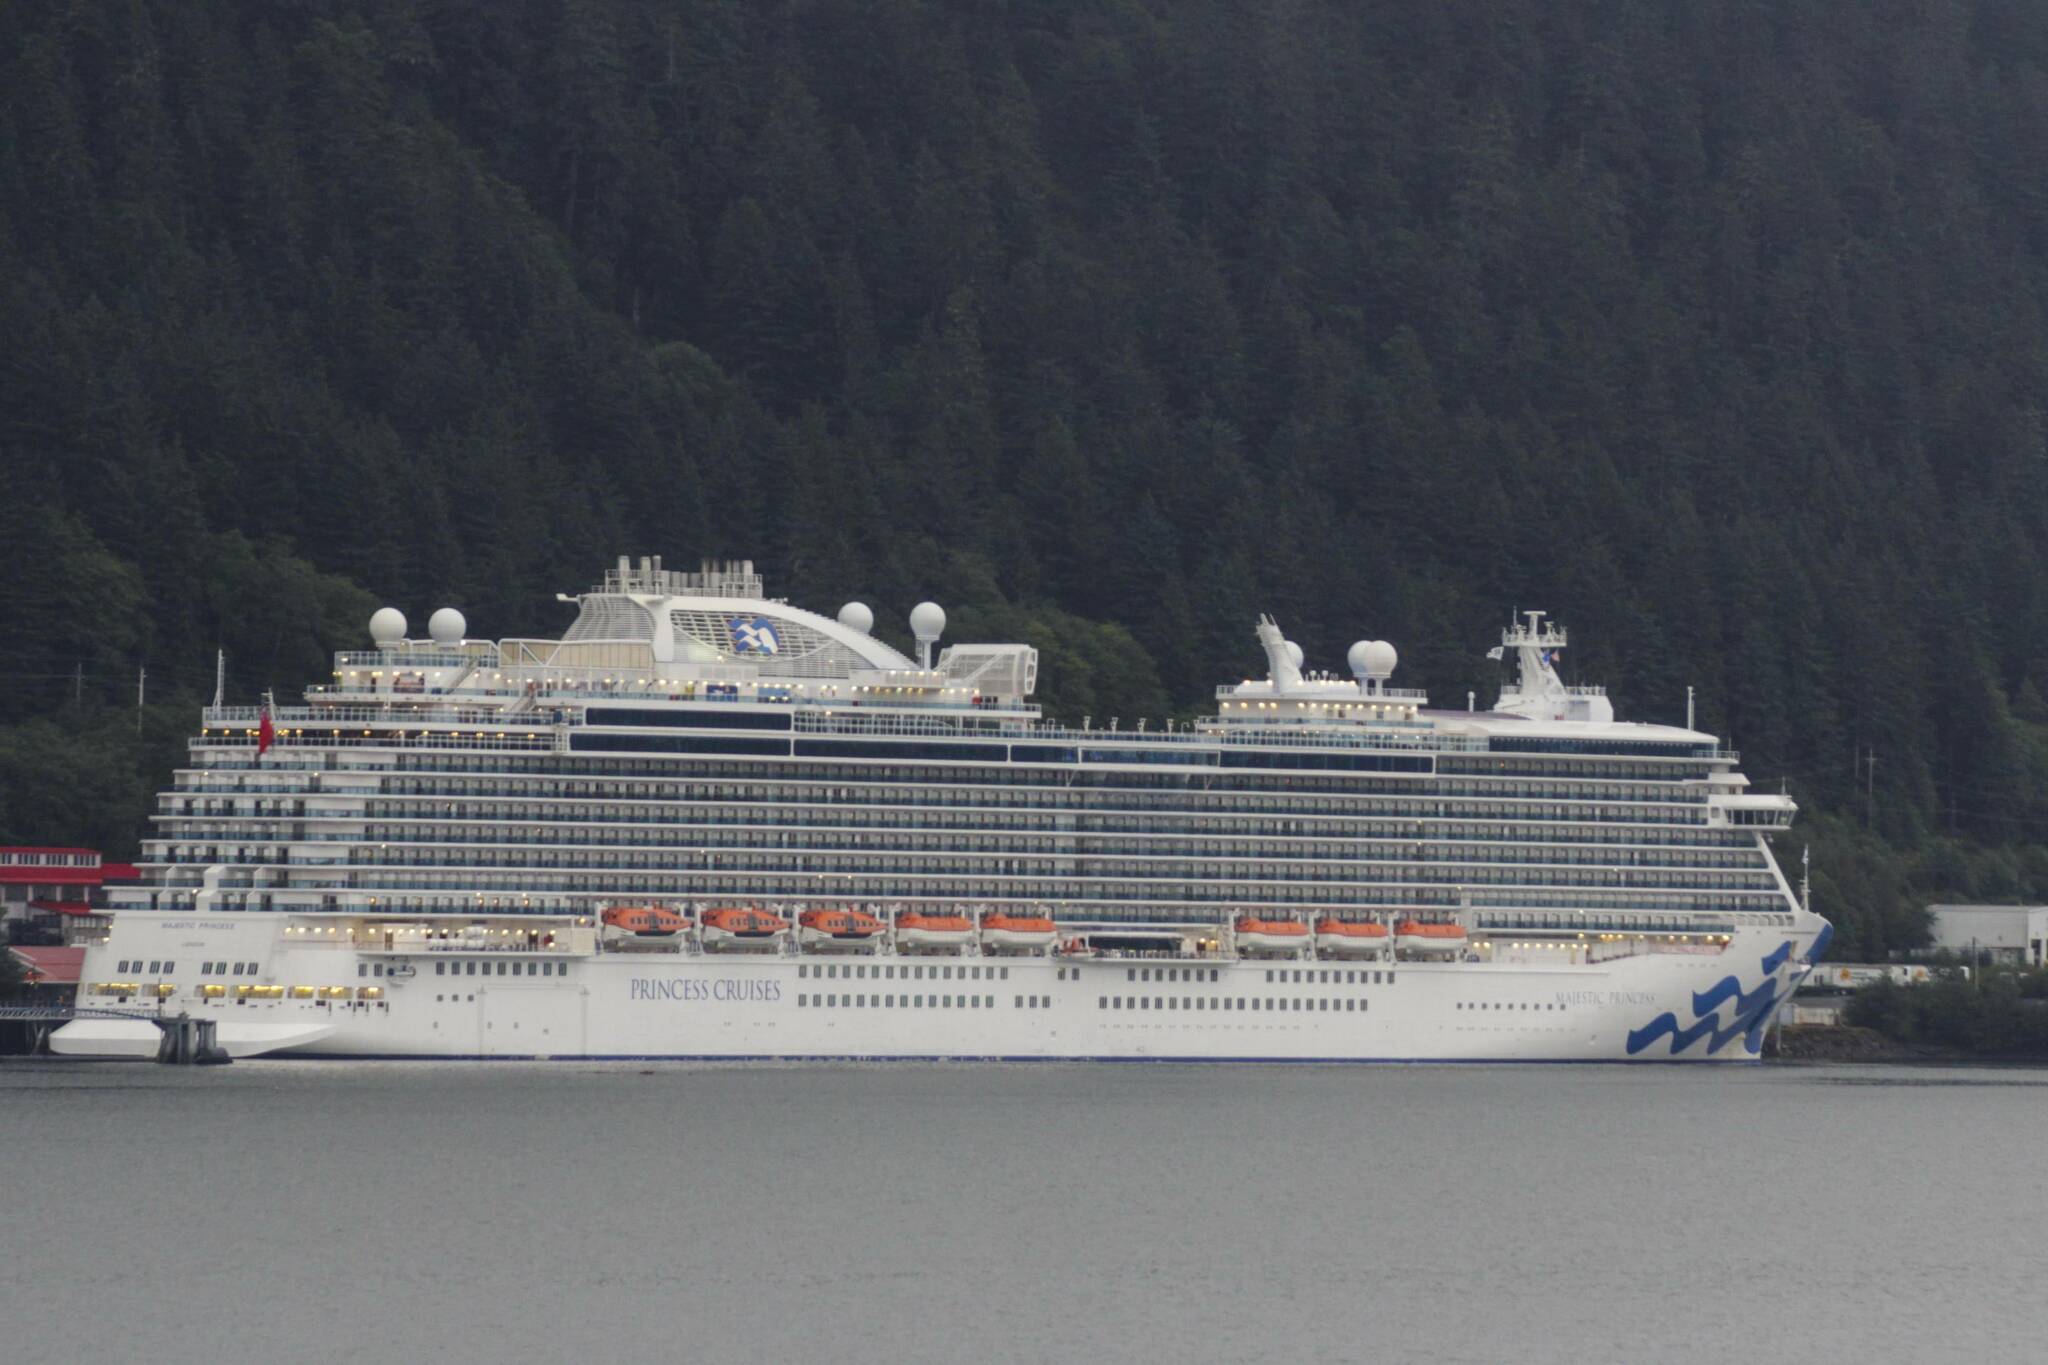 In this Empire file photo, a Princess Cruises ship is seen docked in Juneau on Aug. 25, 2021. The U.S. Department of Justice announced Wednesday the company pleaded guilty to violating the terms of its probabtion stemming from a 2017 conviction for illegal wastewater dumping. (Michael S. Lockett / Juneau Empire File)